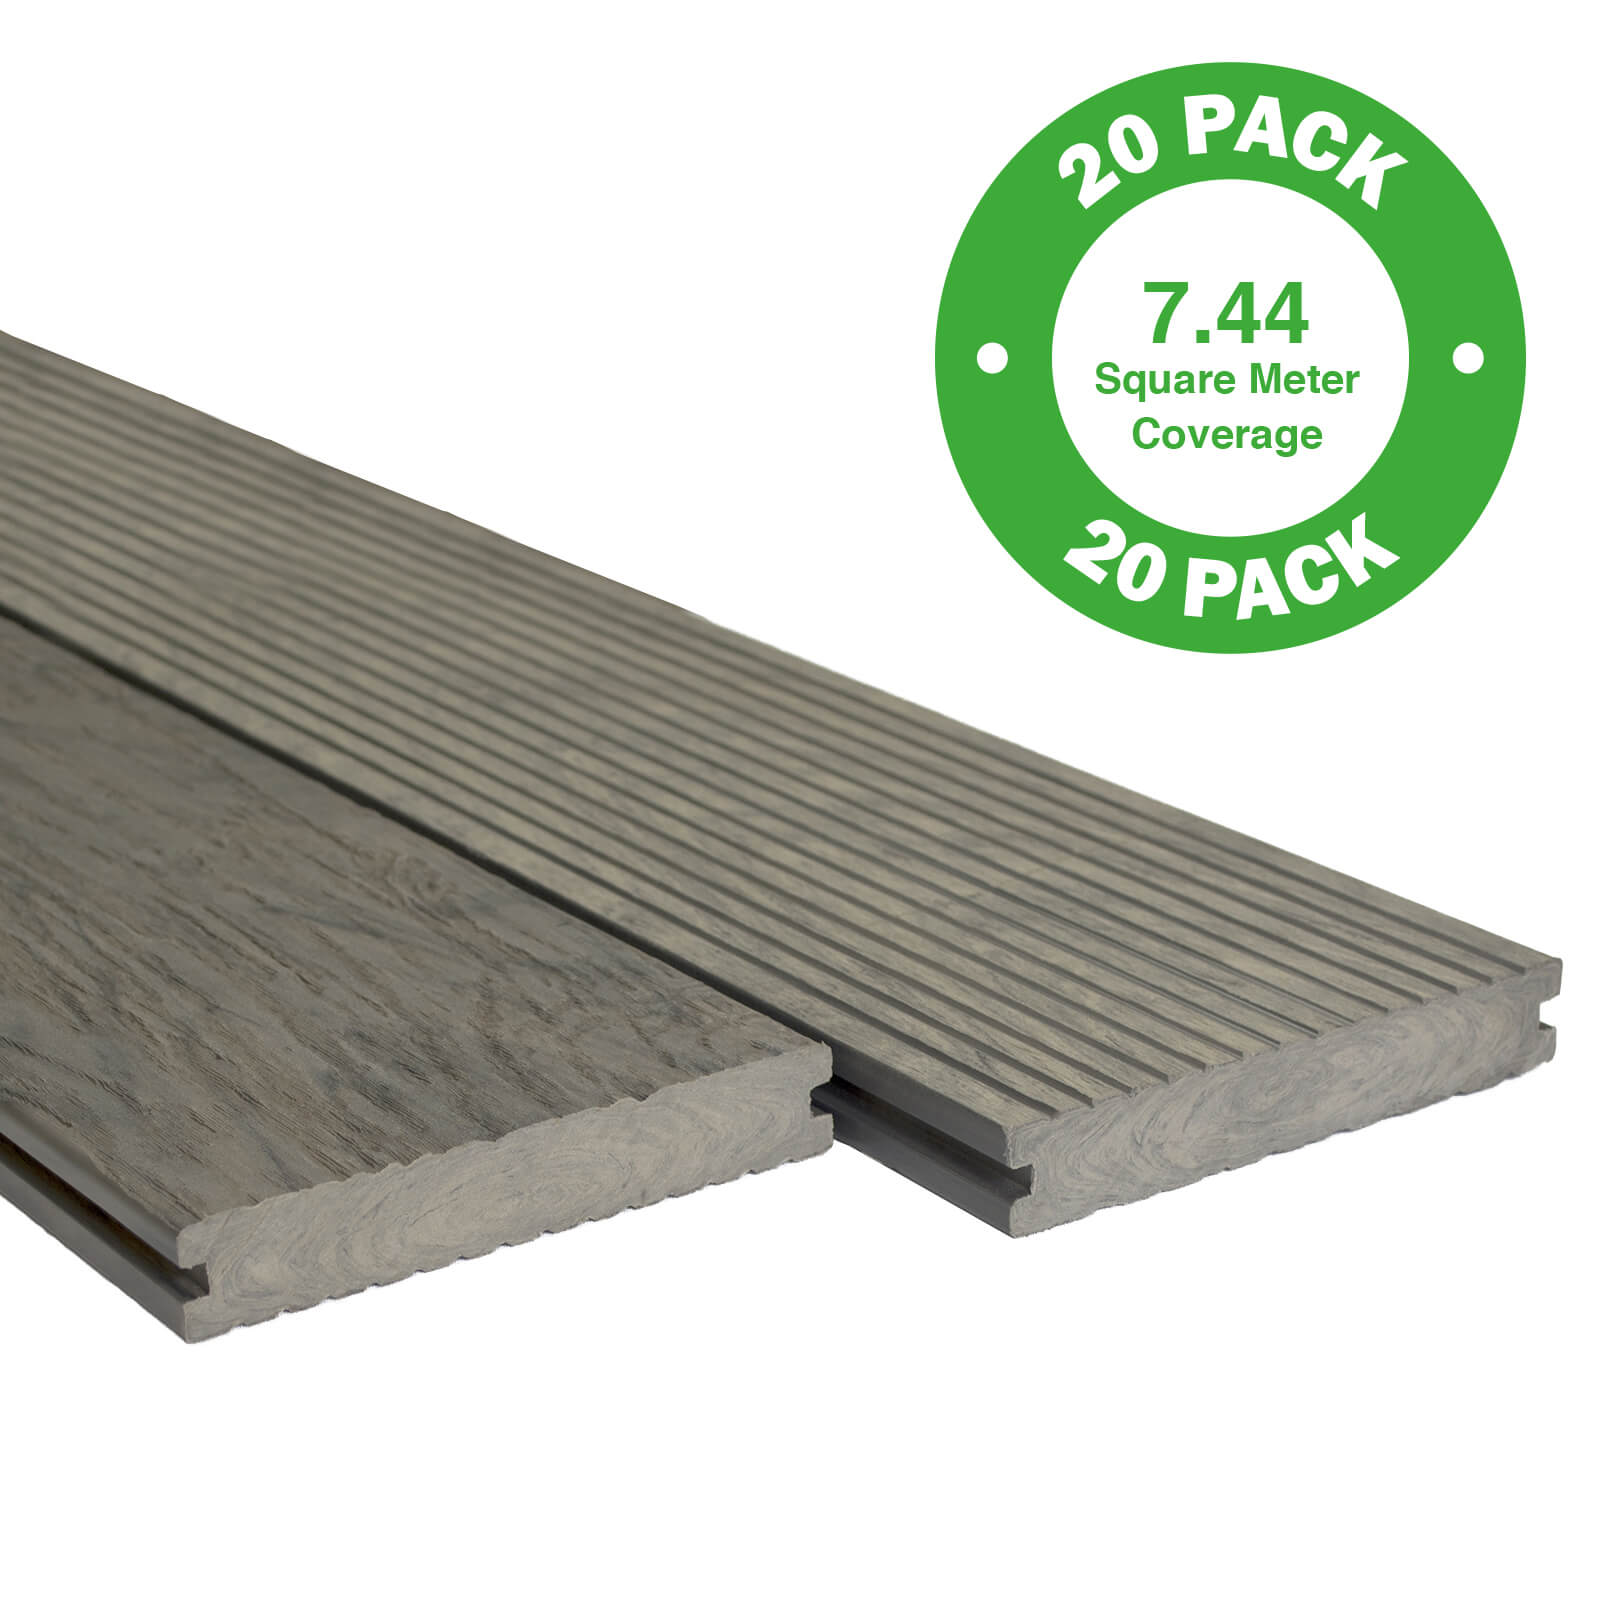 Heritage Composite Decking 20 Pack Driftwood - 7.44 m2